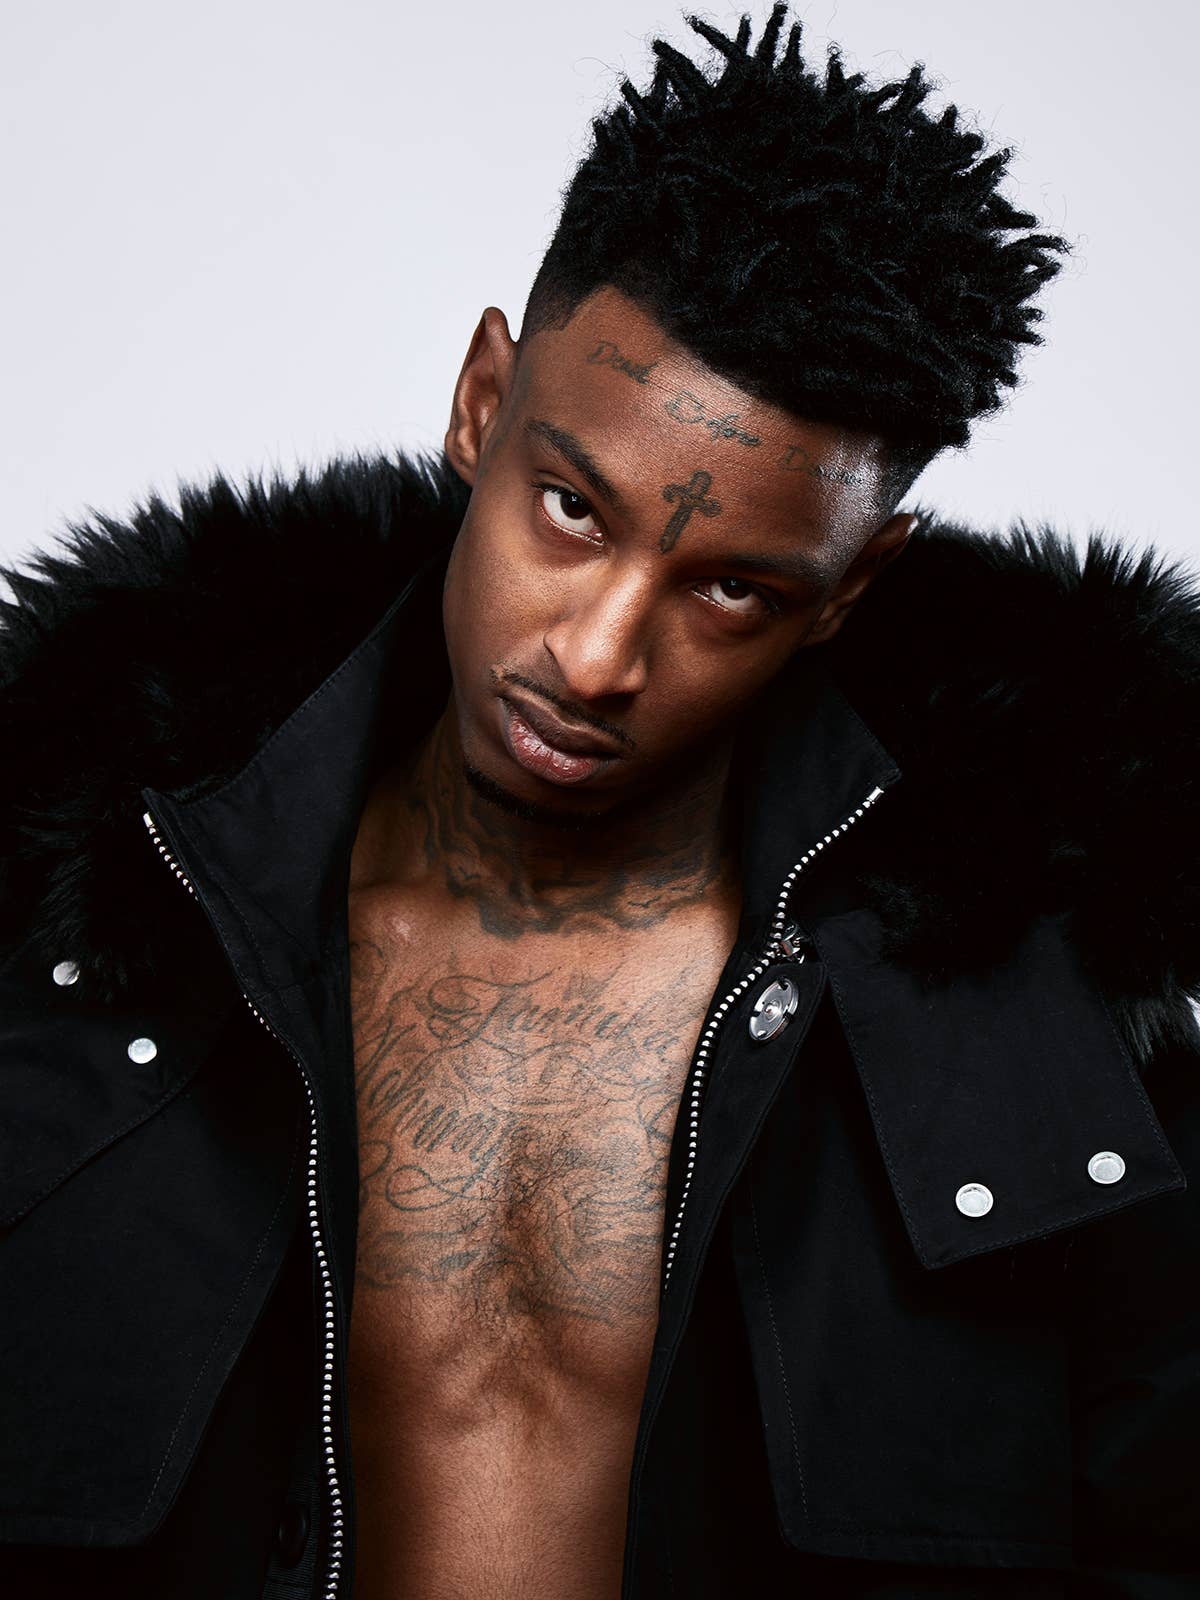 21 Savage Honors Virgil Obloh In a Full Louis Vuitton Outfit